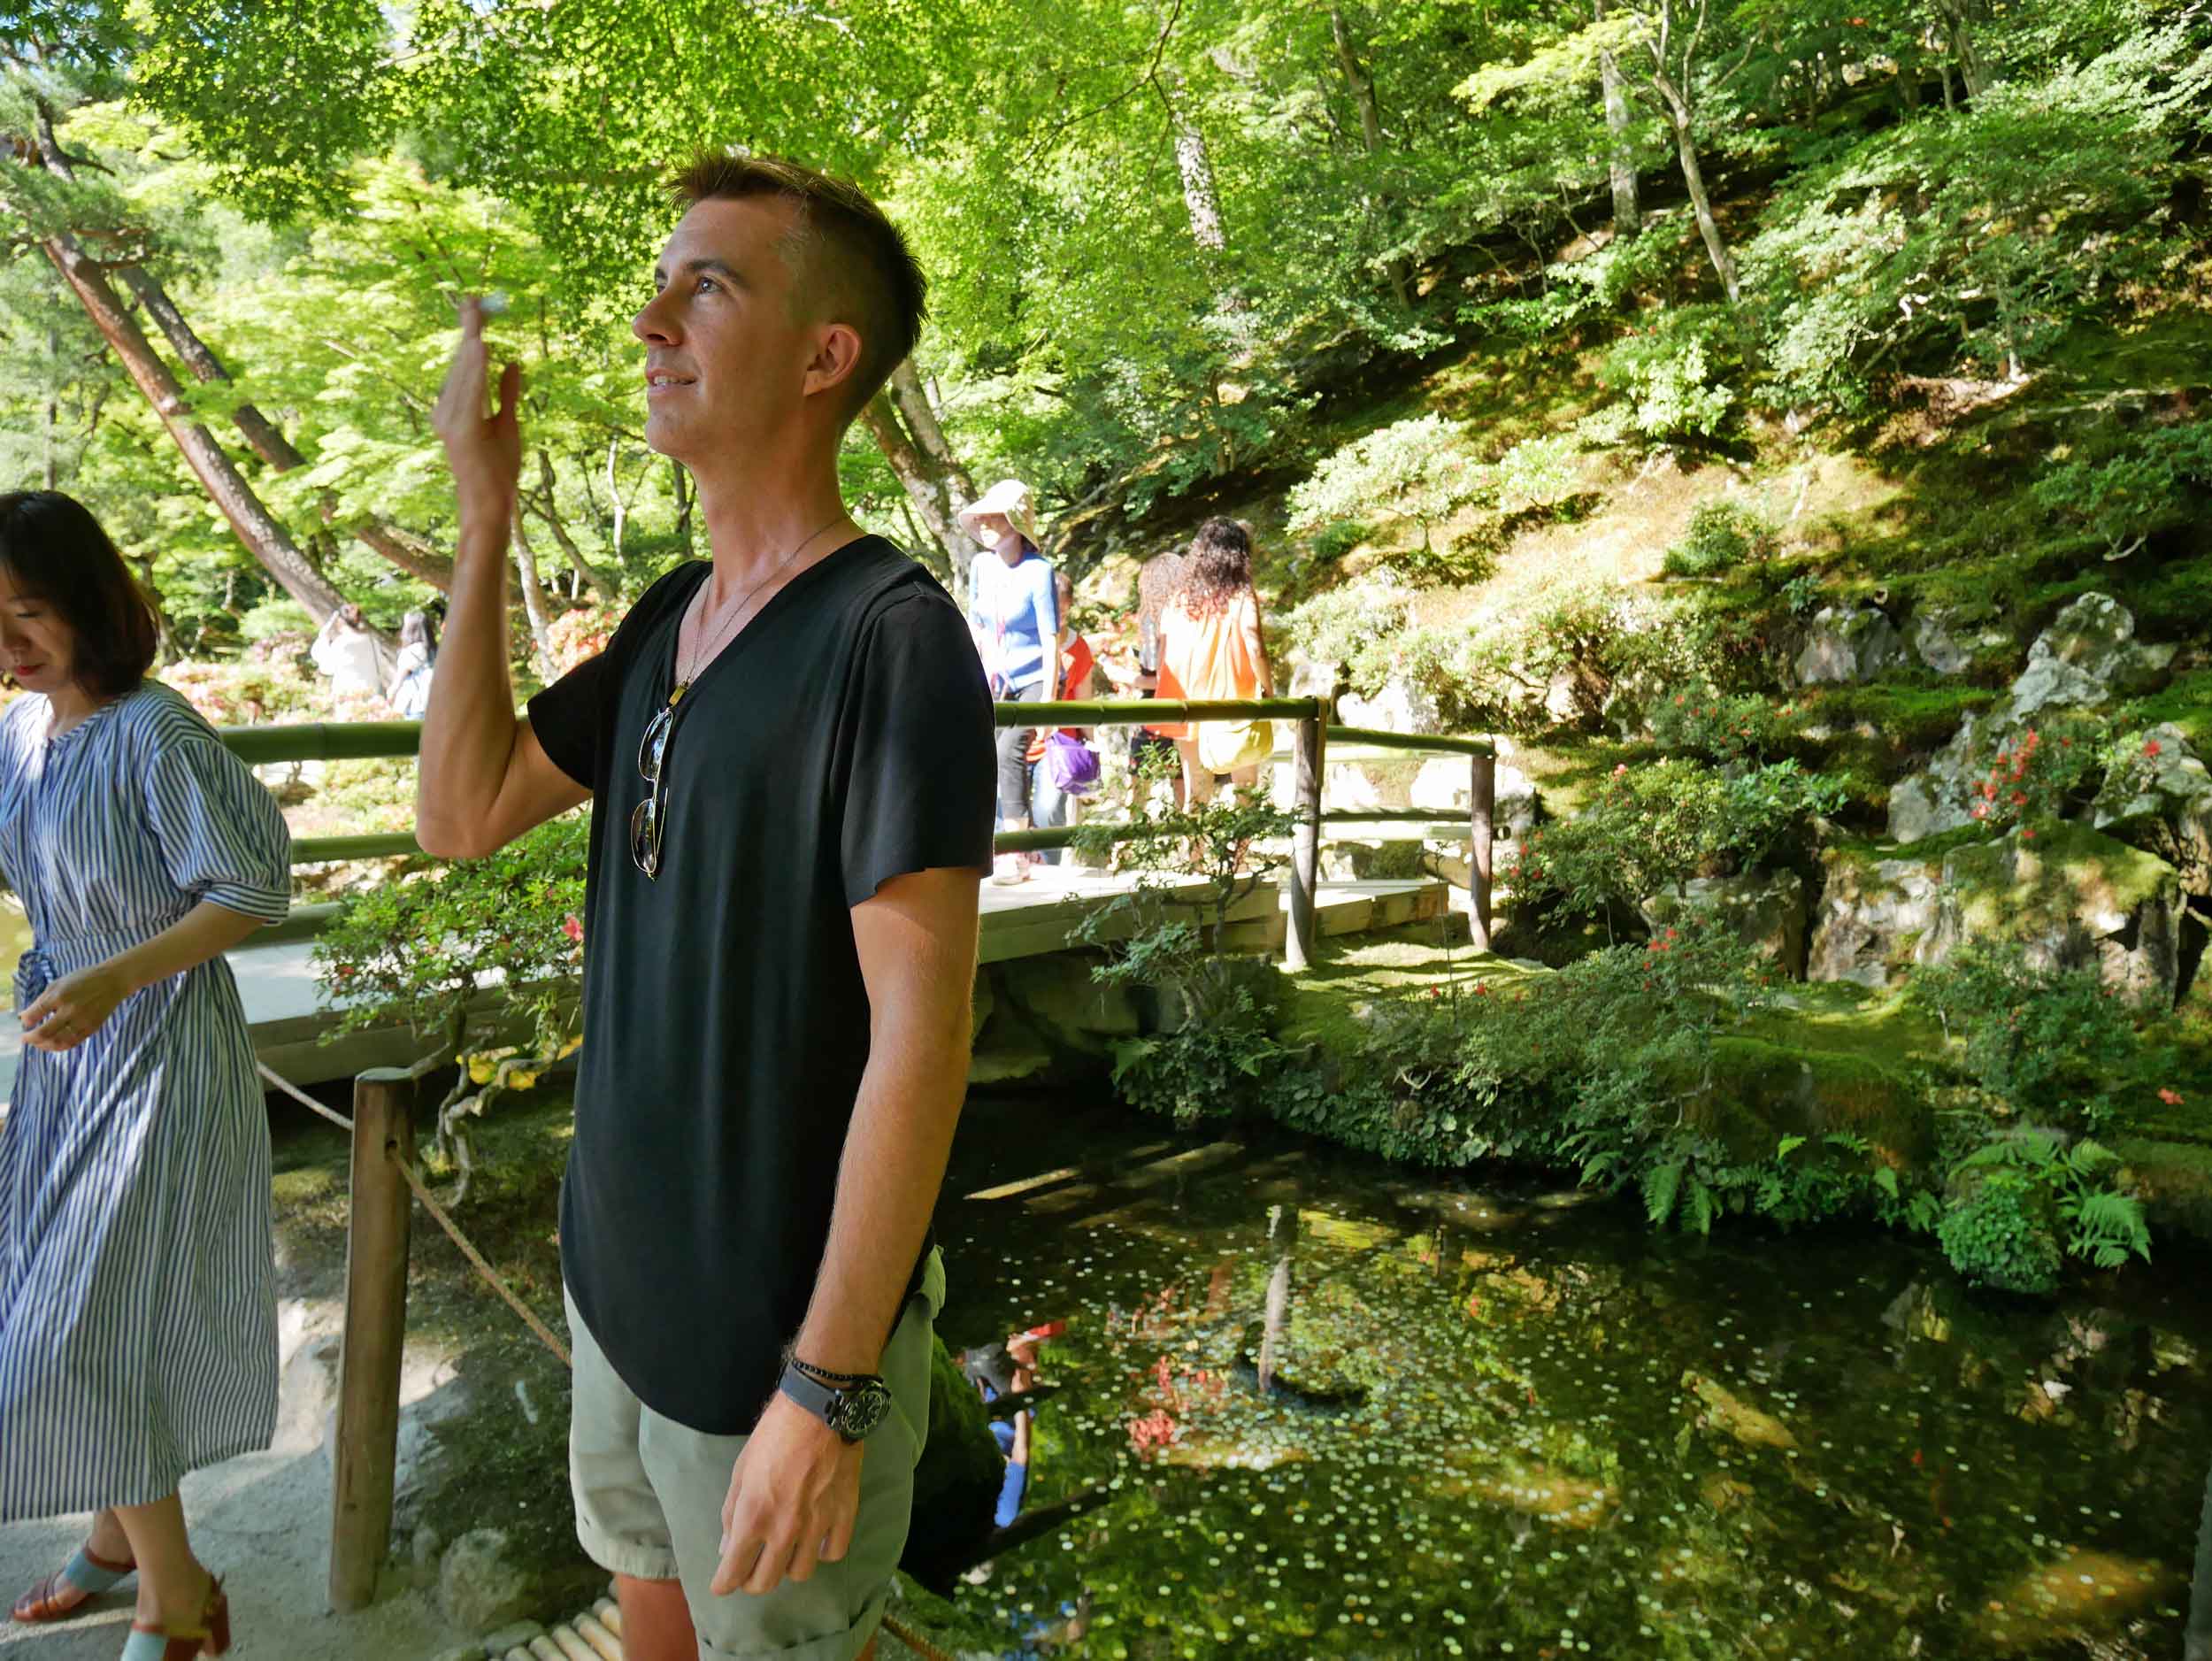  Trey making a wish with the toss of a coin into a pond in Ginkaku-ju temple complex. 